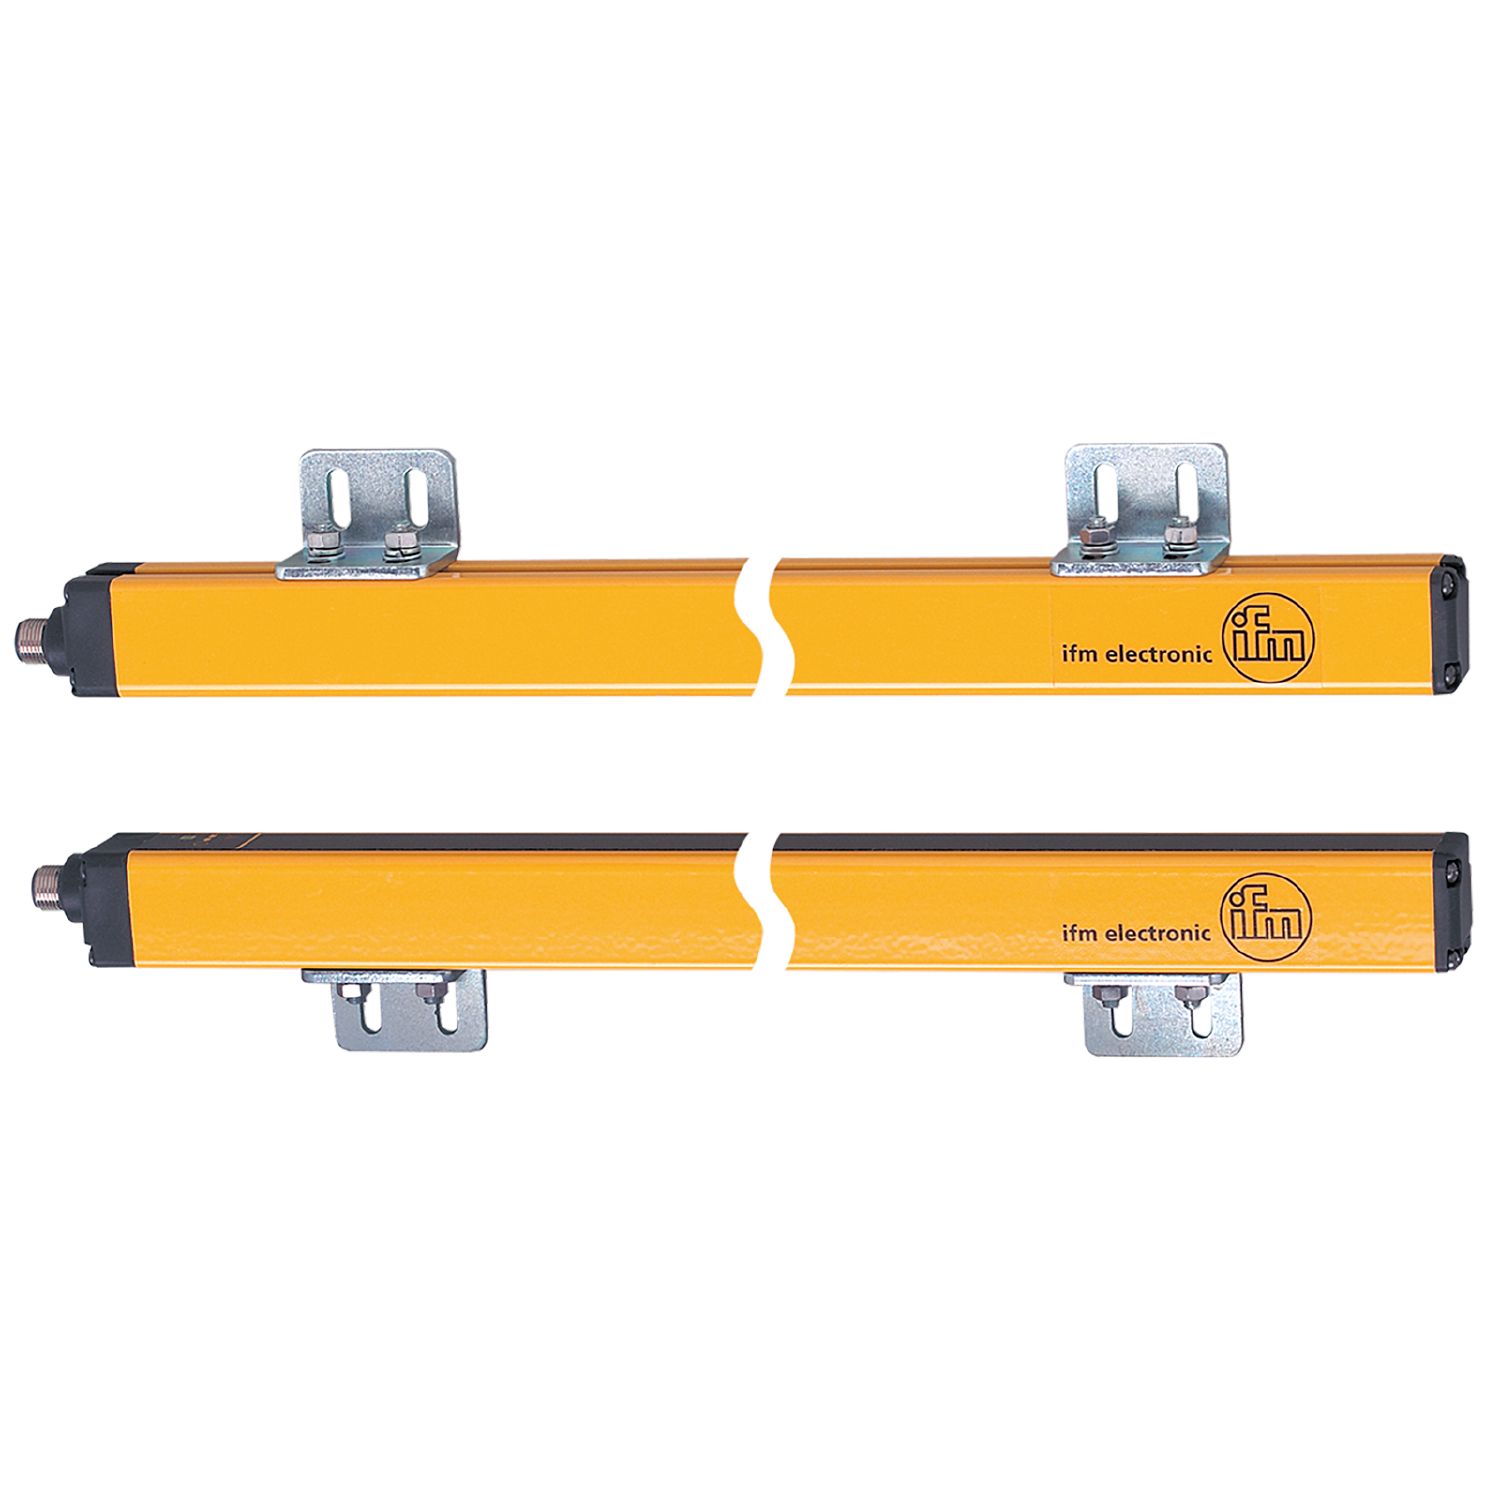 OY039S - Safety light curtain - ifm